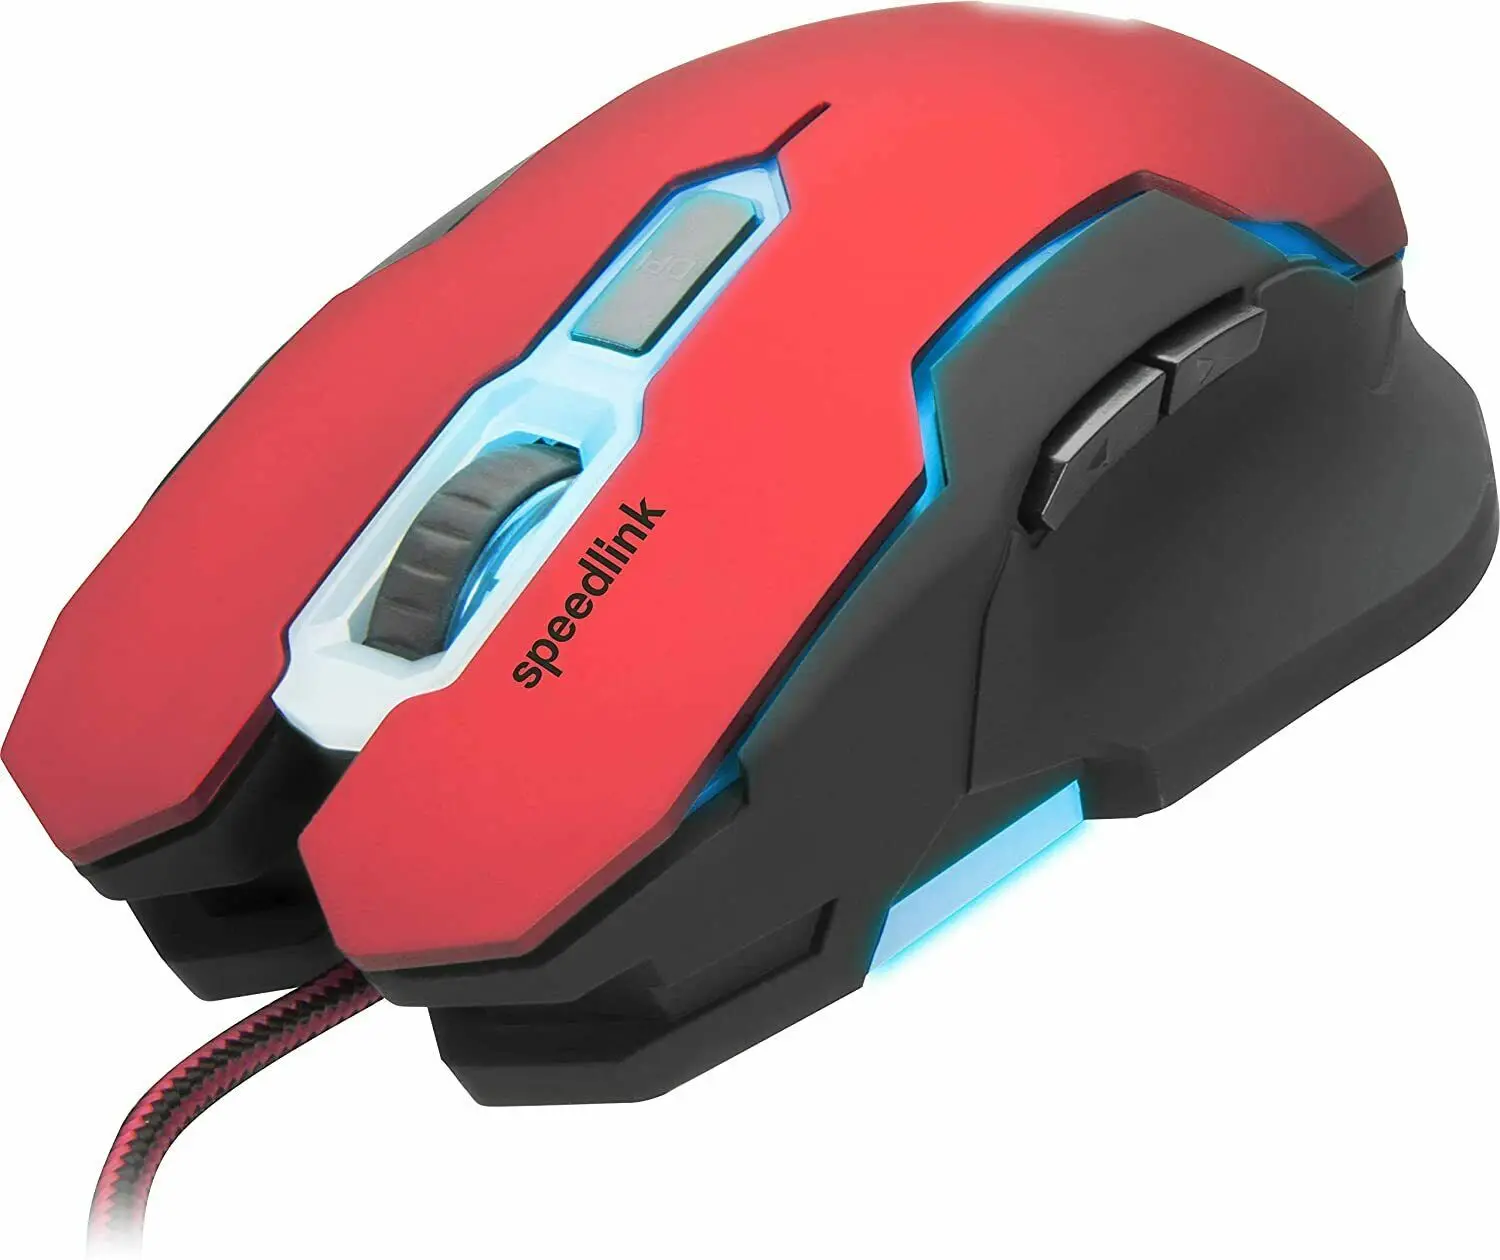 

Speedlink PC Optical Gaming Mouse Contus Red New